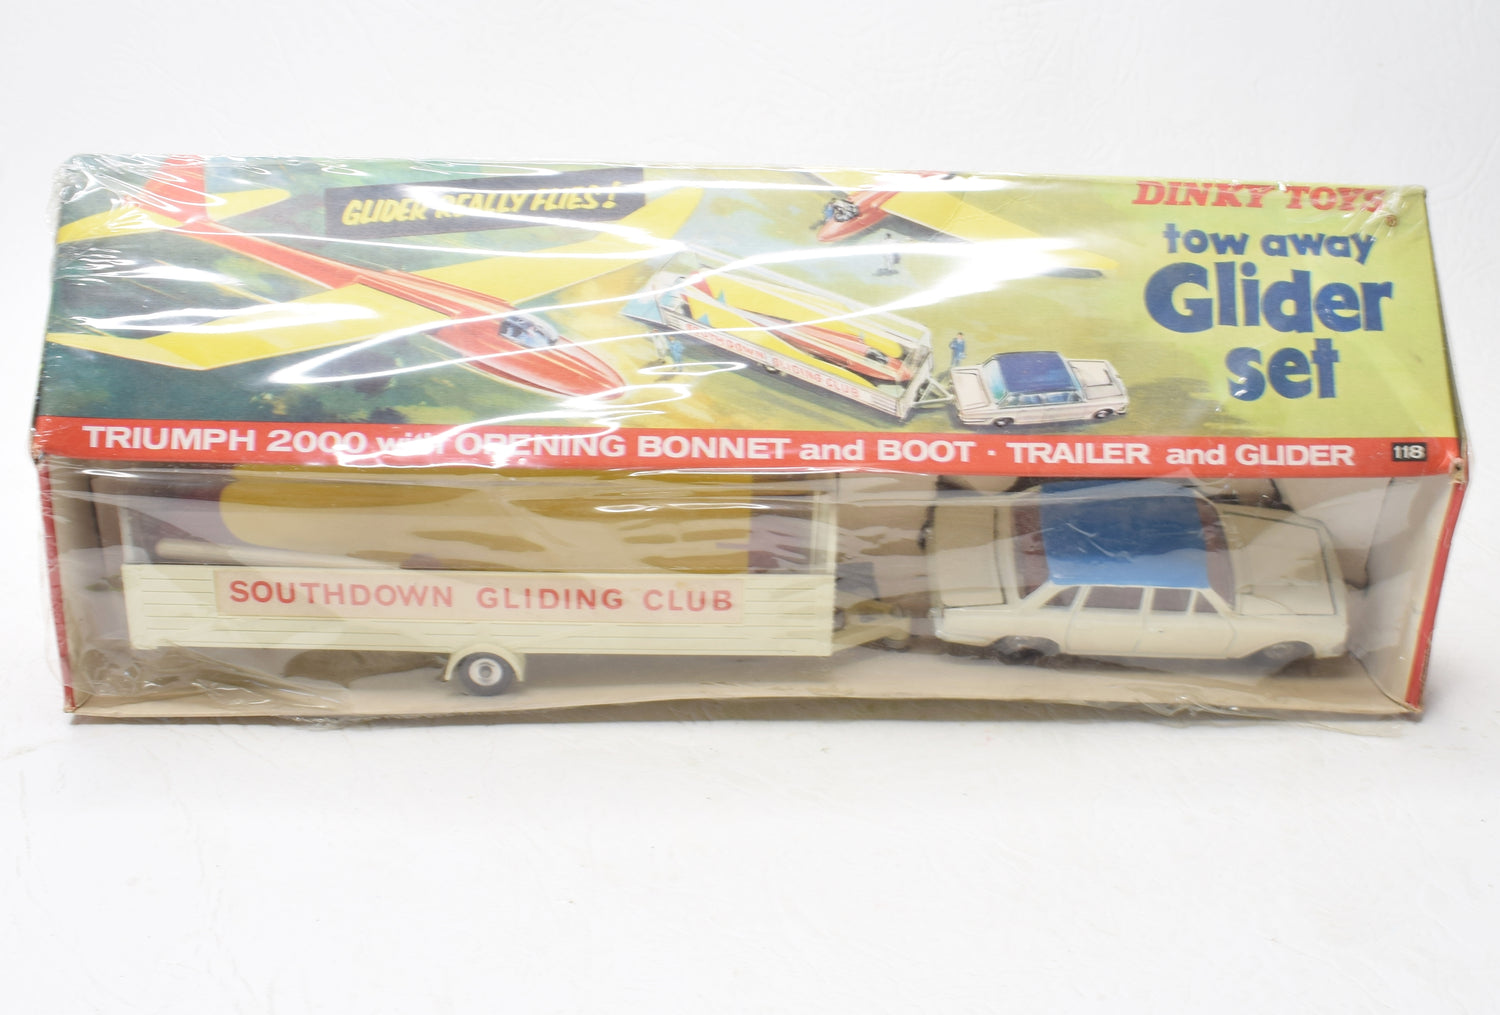 Dinky toys 118 tow away Glider set Very Near Mint/Boxed